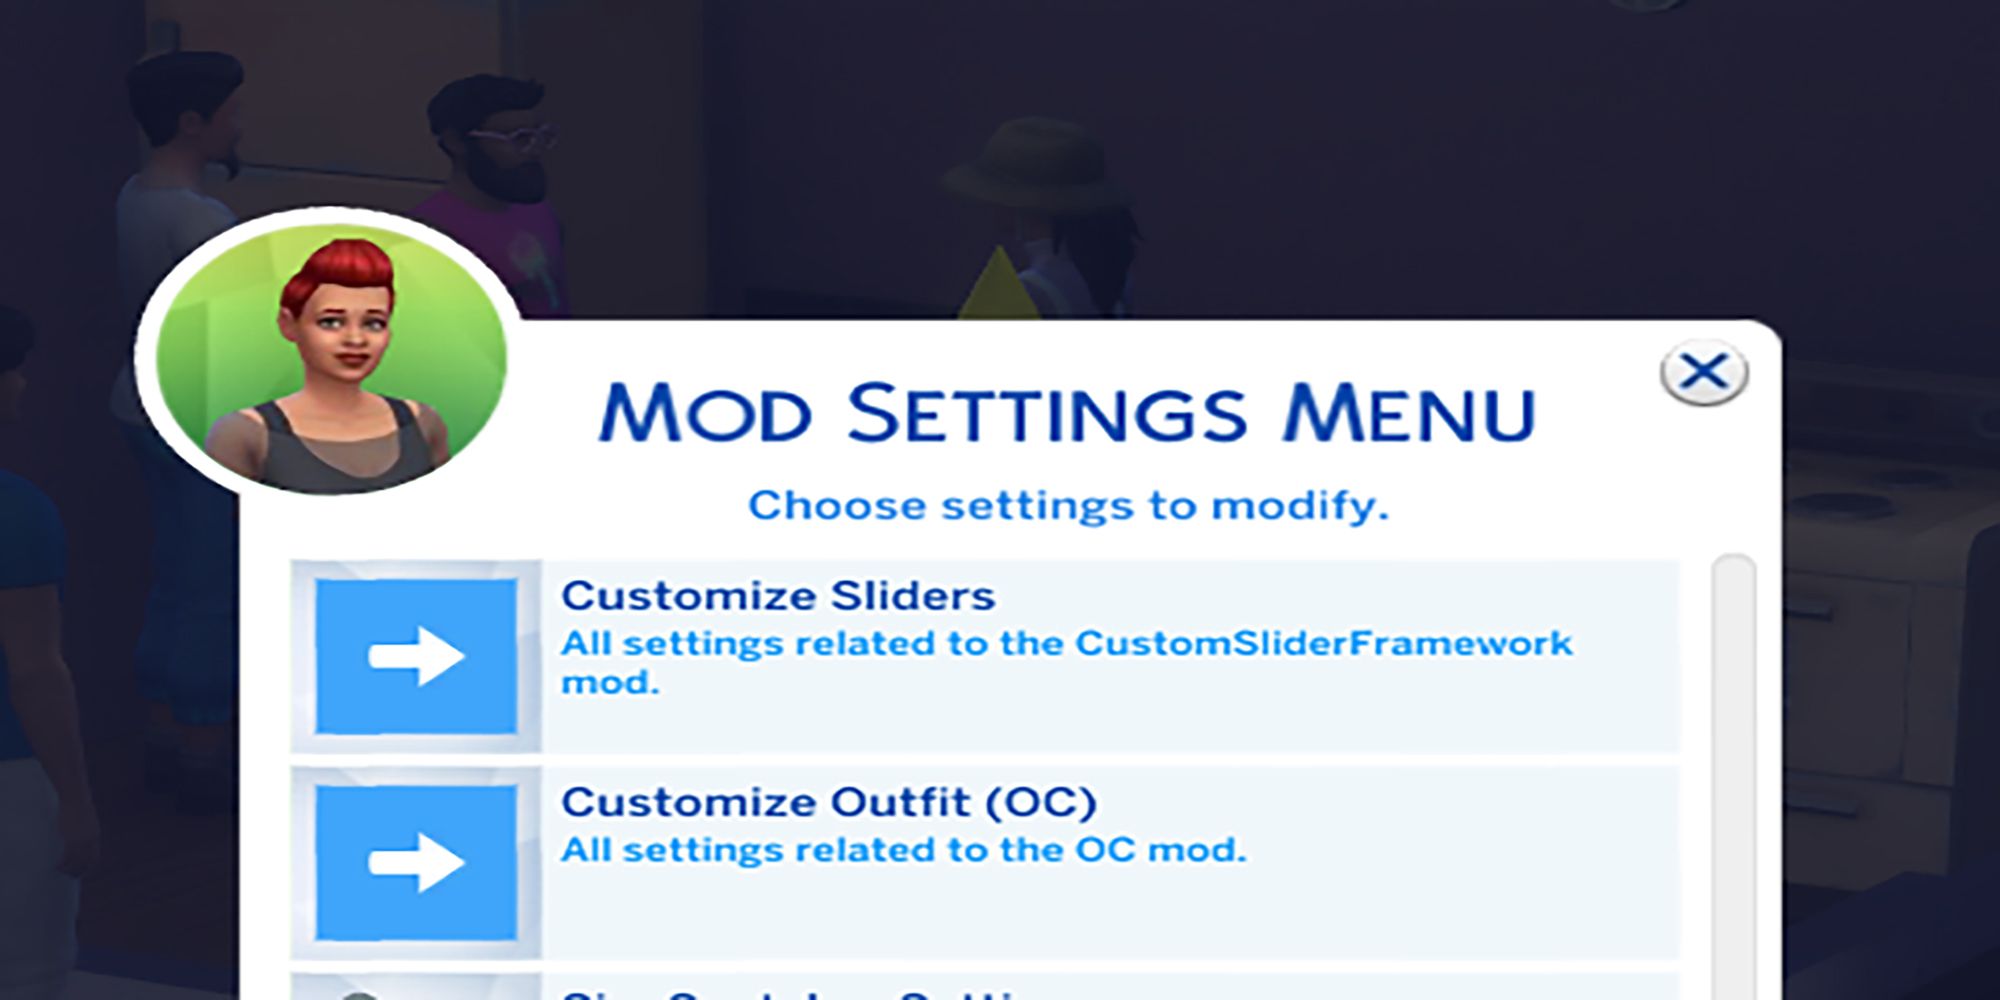 The Mod Settings Menu UI from The Sims 4.